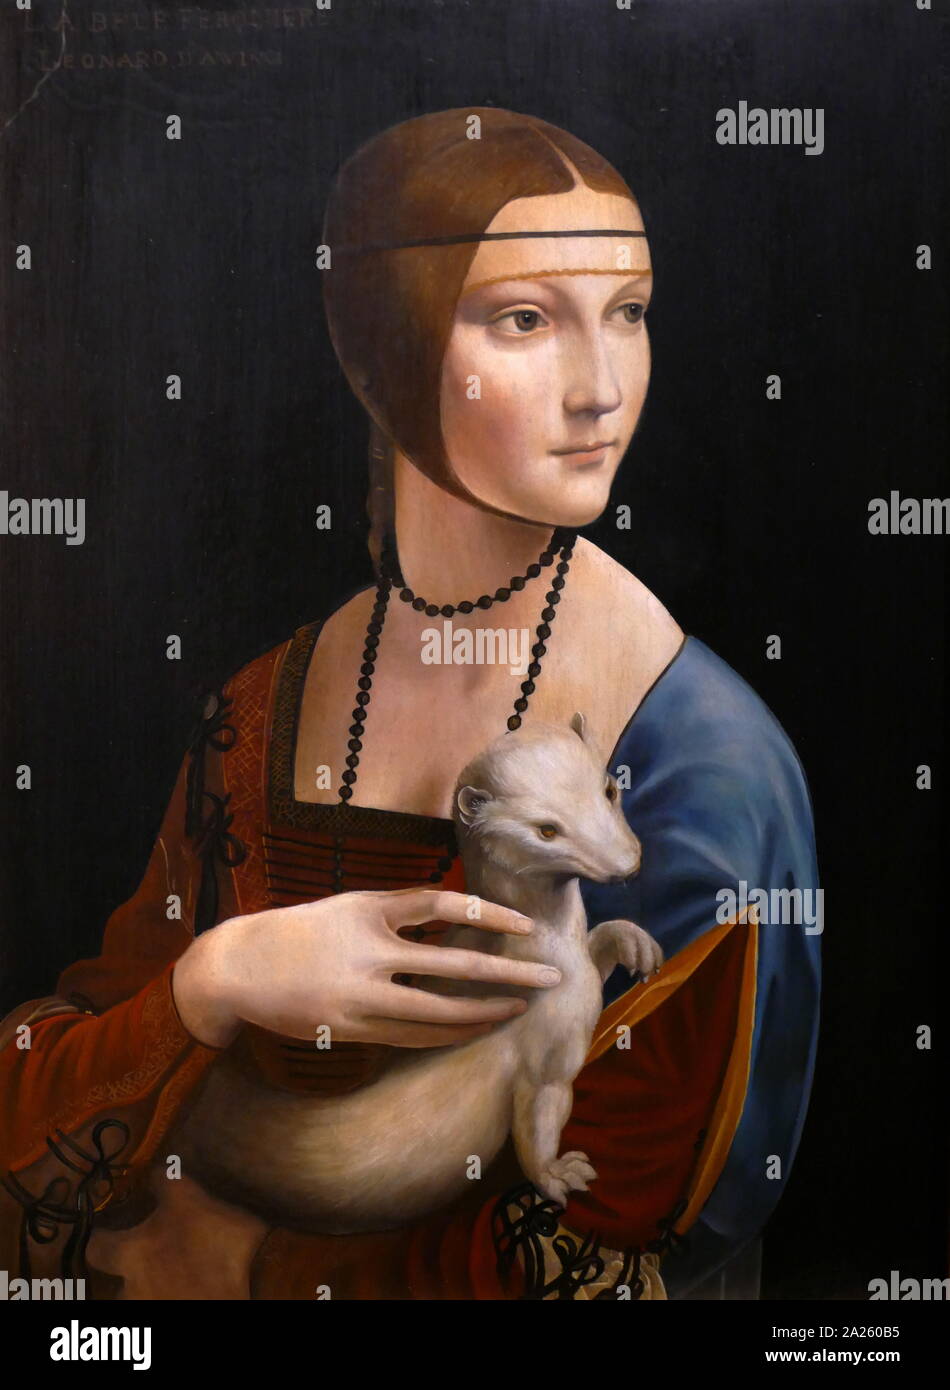 Lady with an Ermine, a painting by Italian artist Leonardo da Vinci, circa 1489-1490. The portrait's subject is Cecilia Gallerani, painted at a time when she was the mistress of Ludovico Sforza, Duke of Milan, and Leonardo was in the Duke's service. Stock Photo